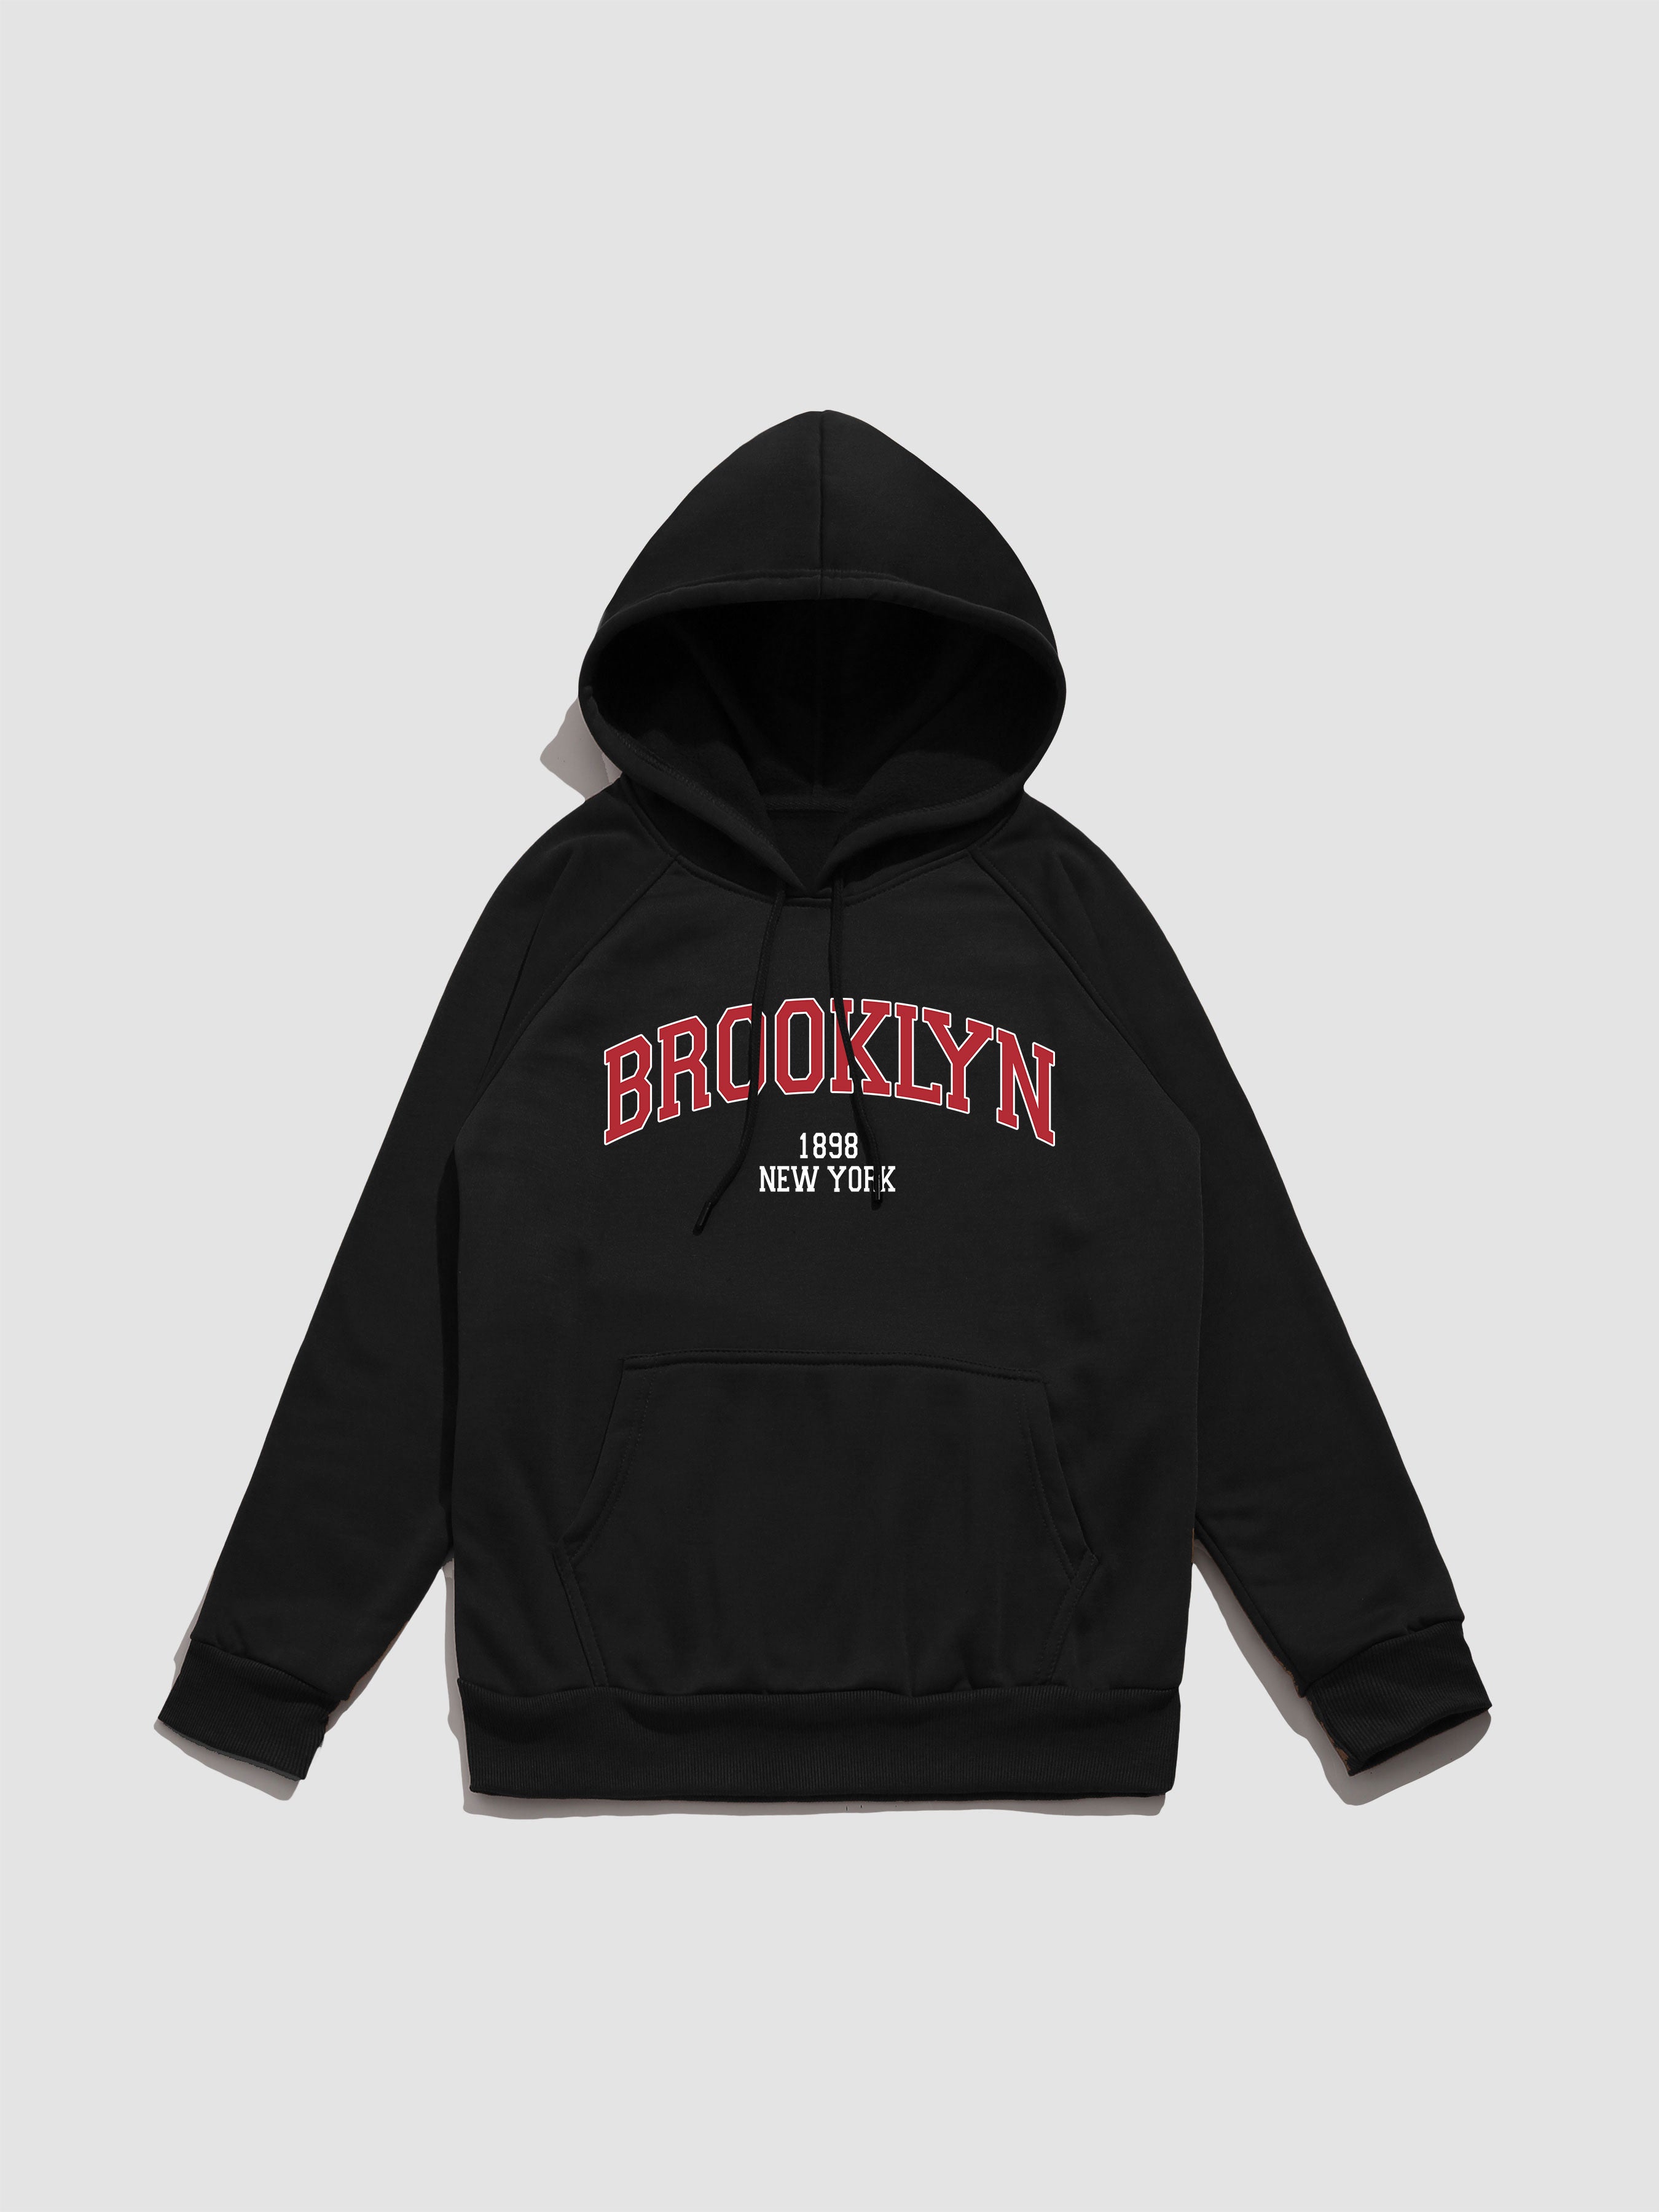 Brooklyn Letter Graphic Hoodies